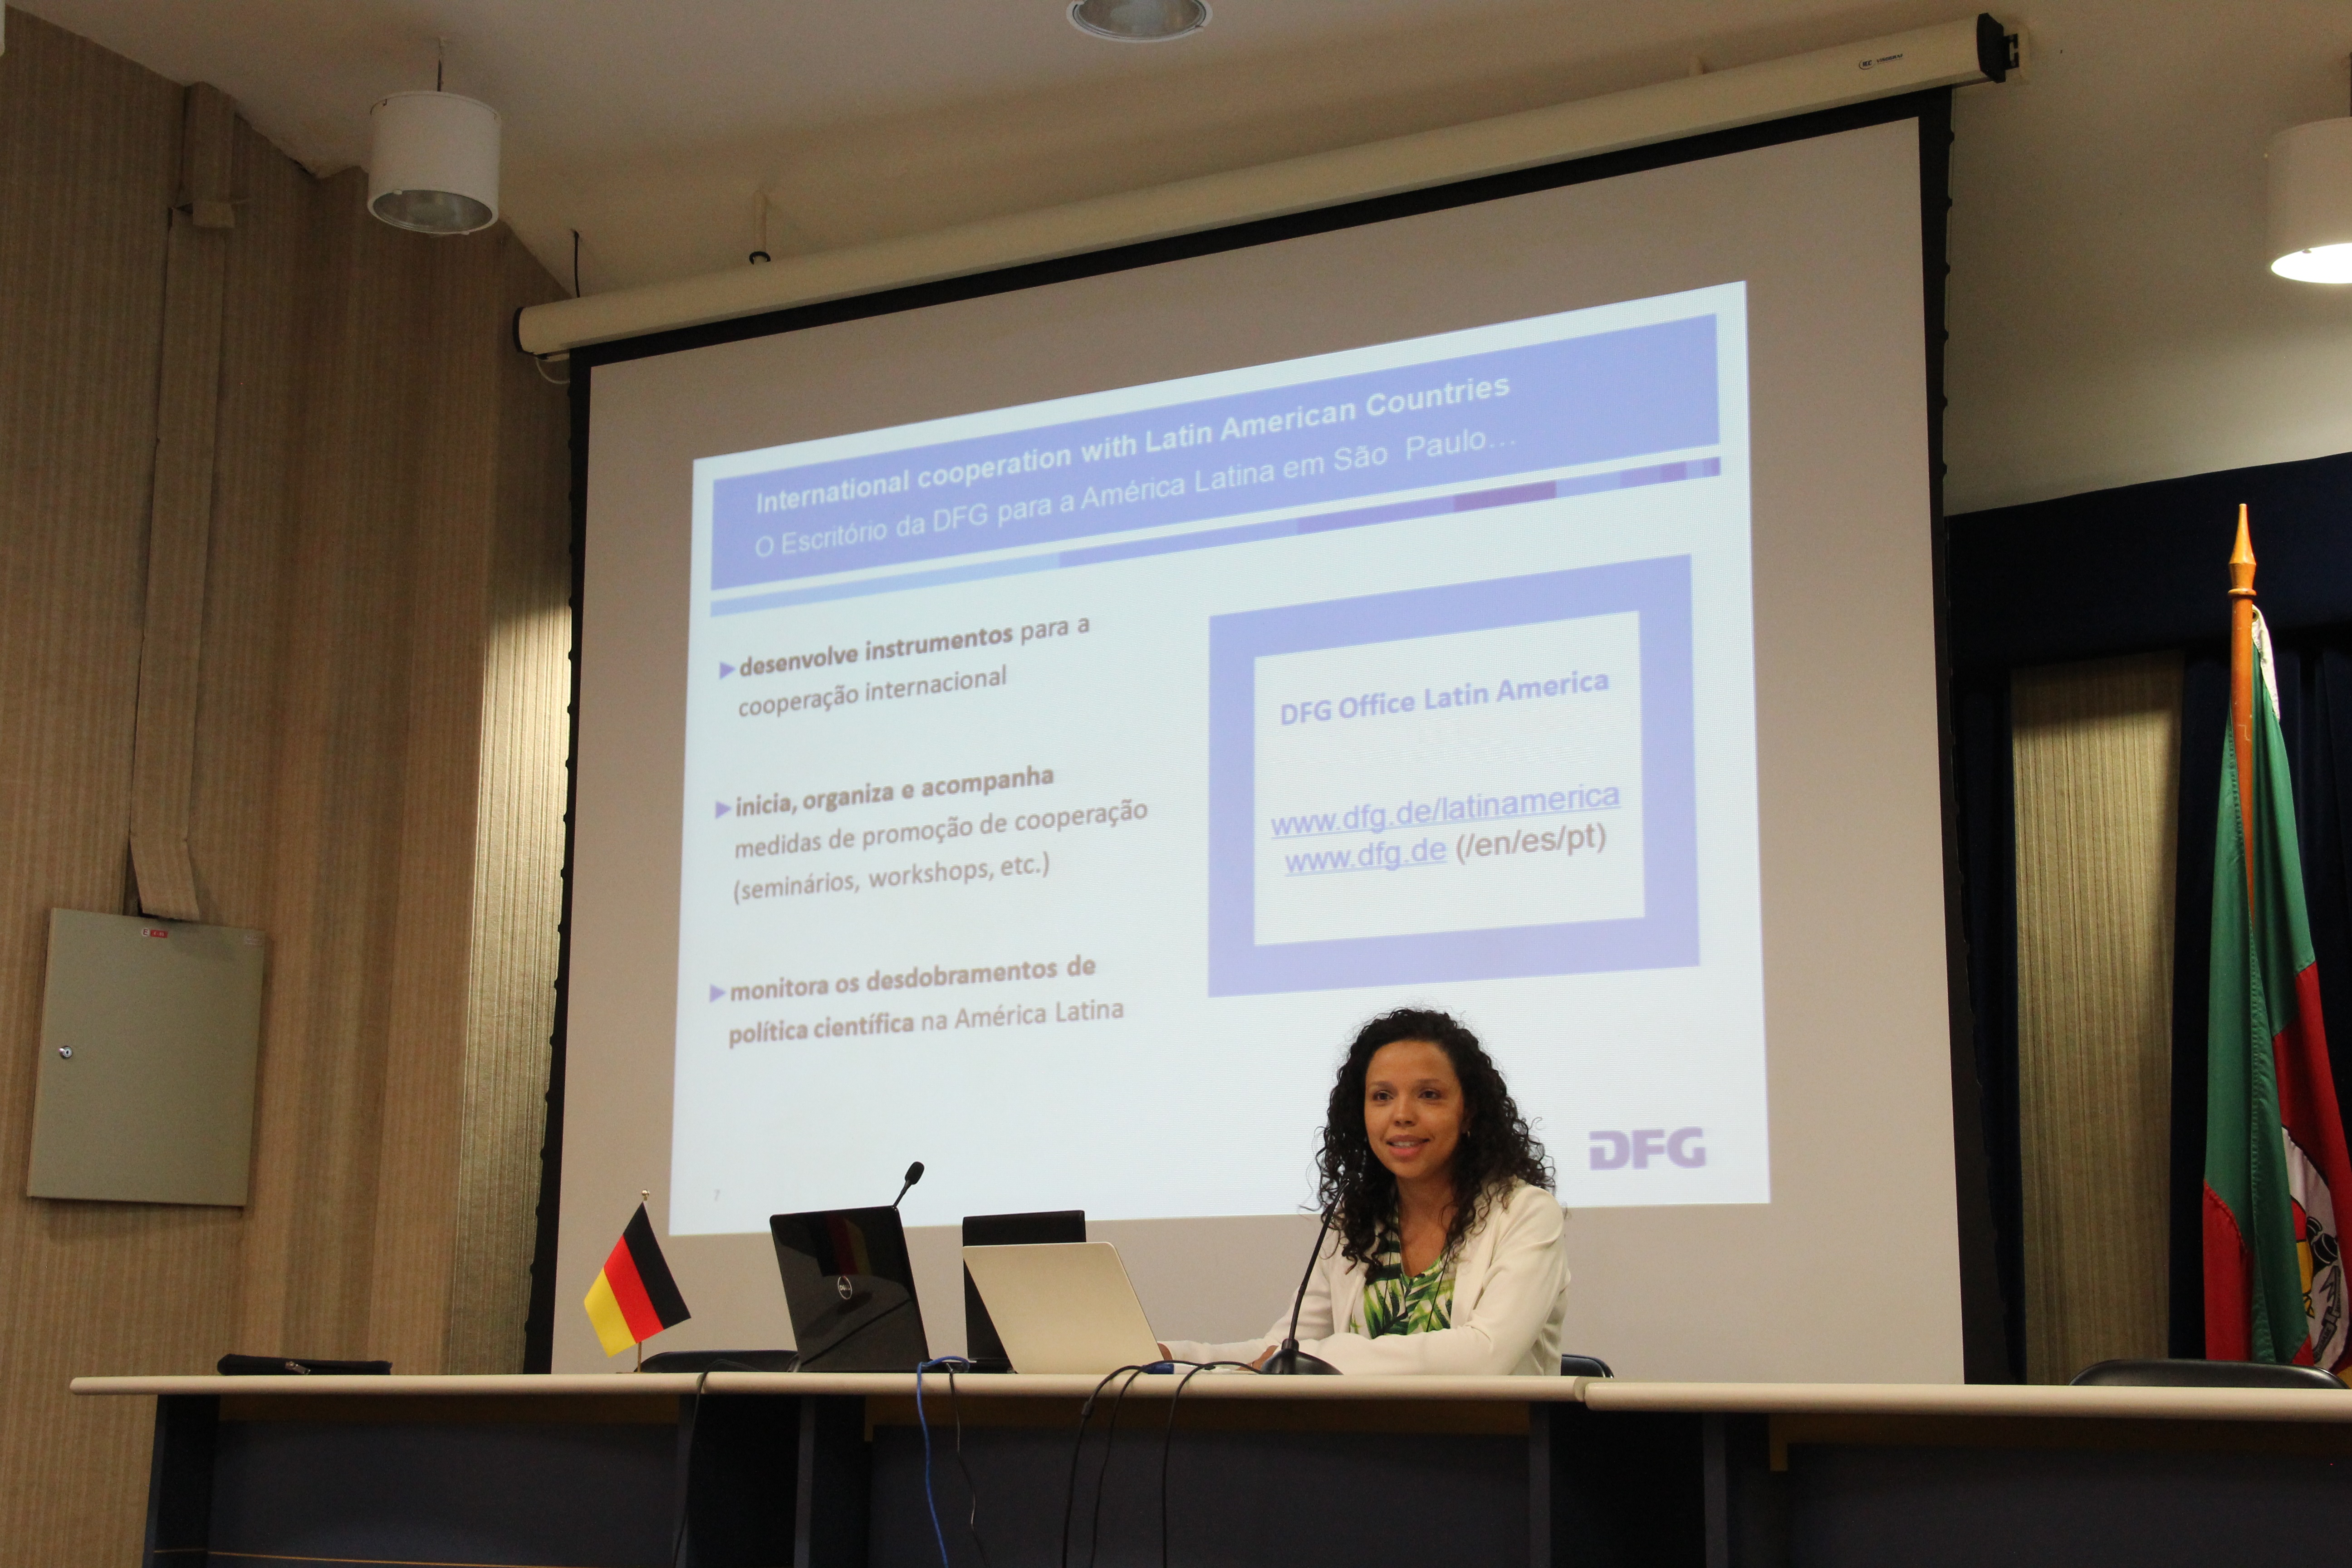 Carolina Santa Rosa introduced the DFG's funding programmes as part of the Research in Germany Initiative